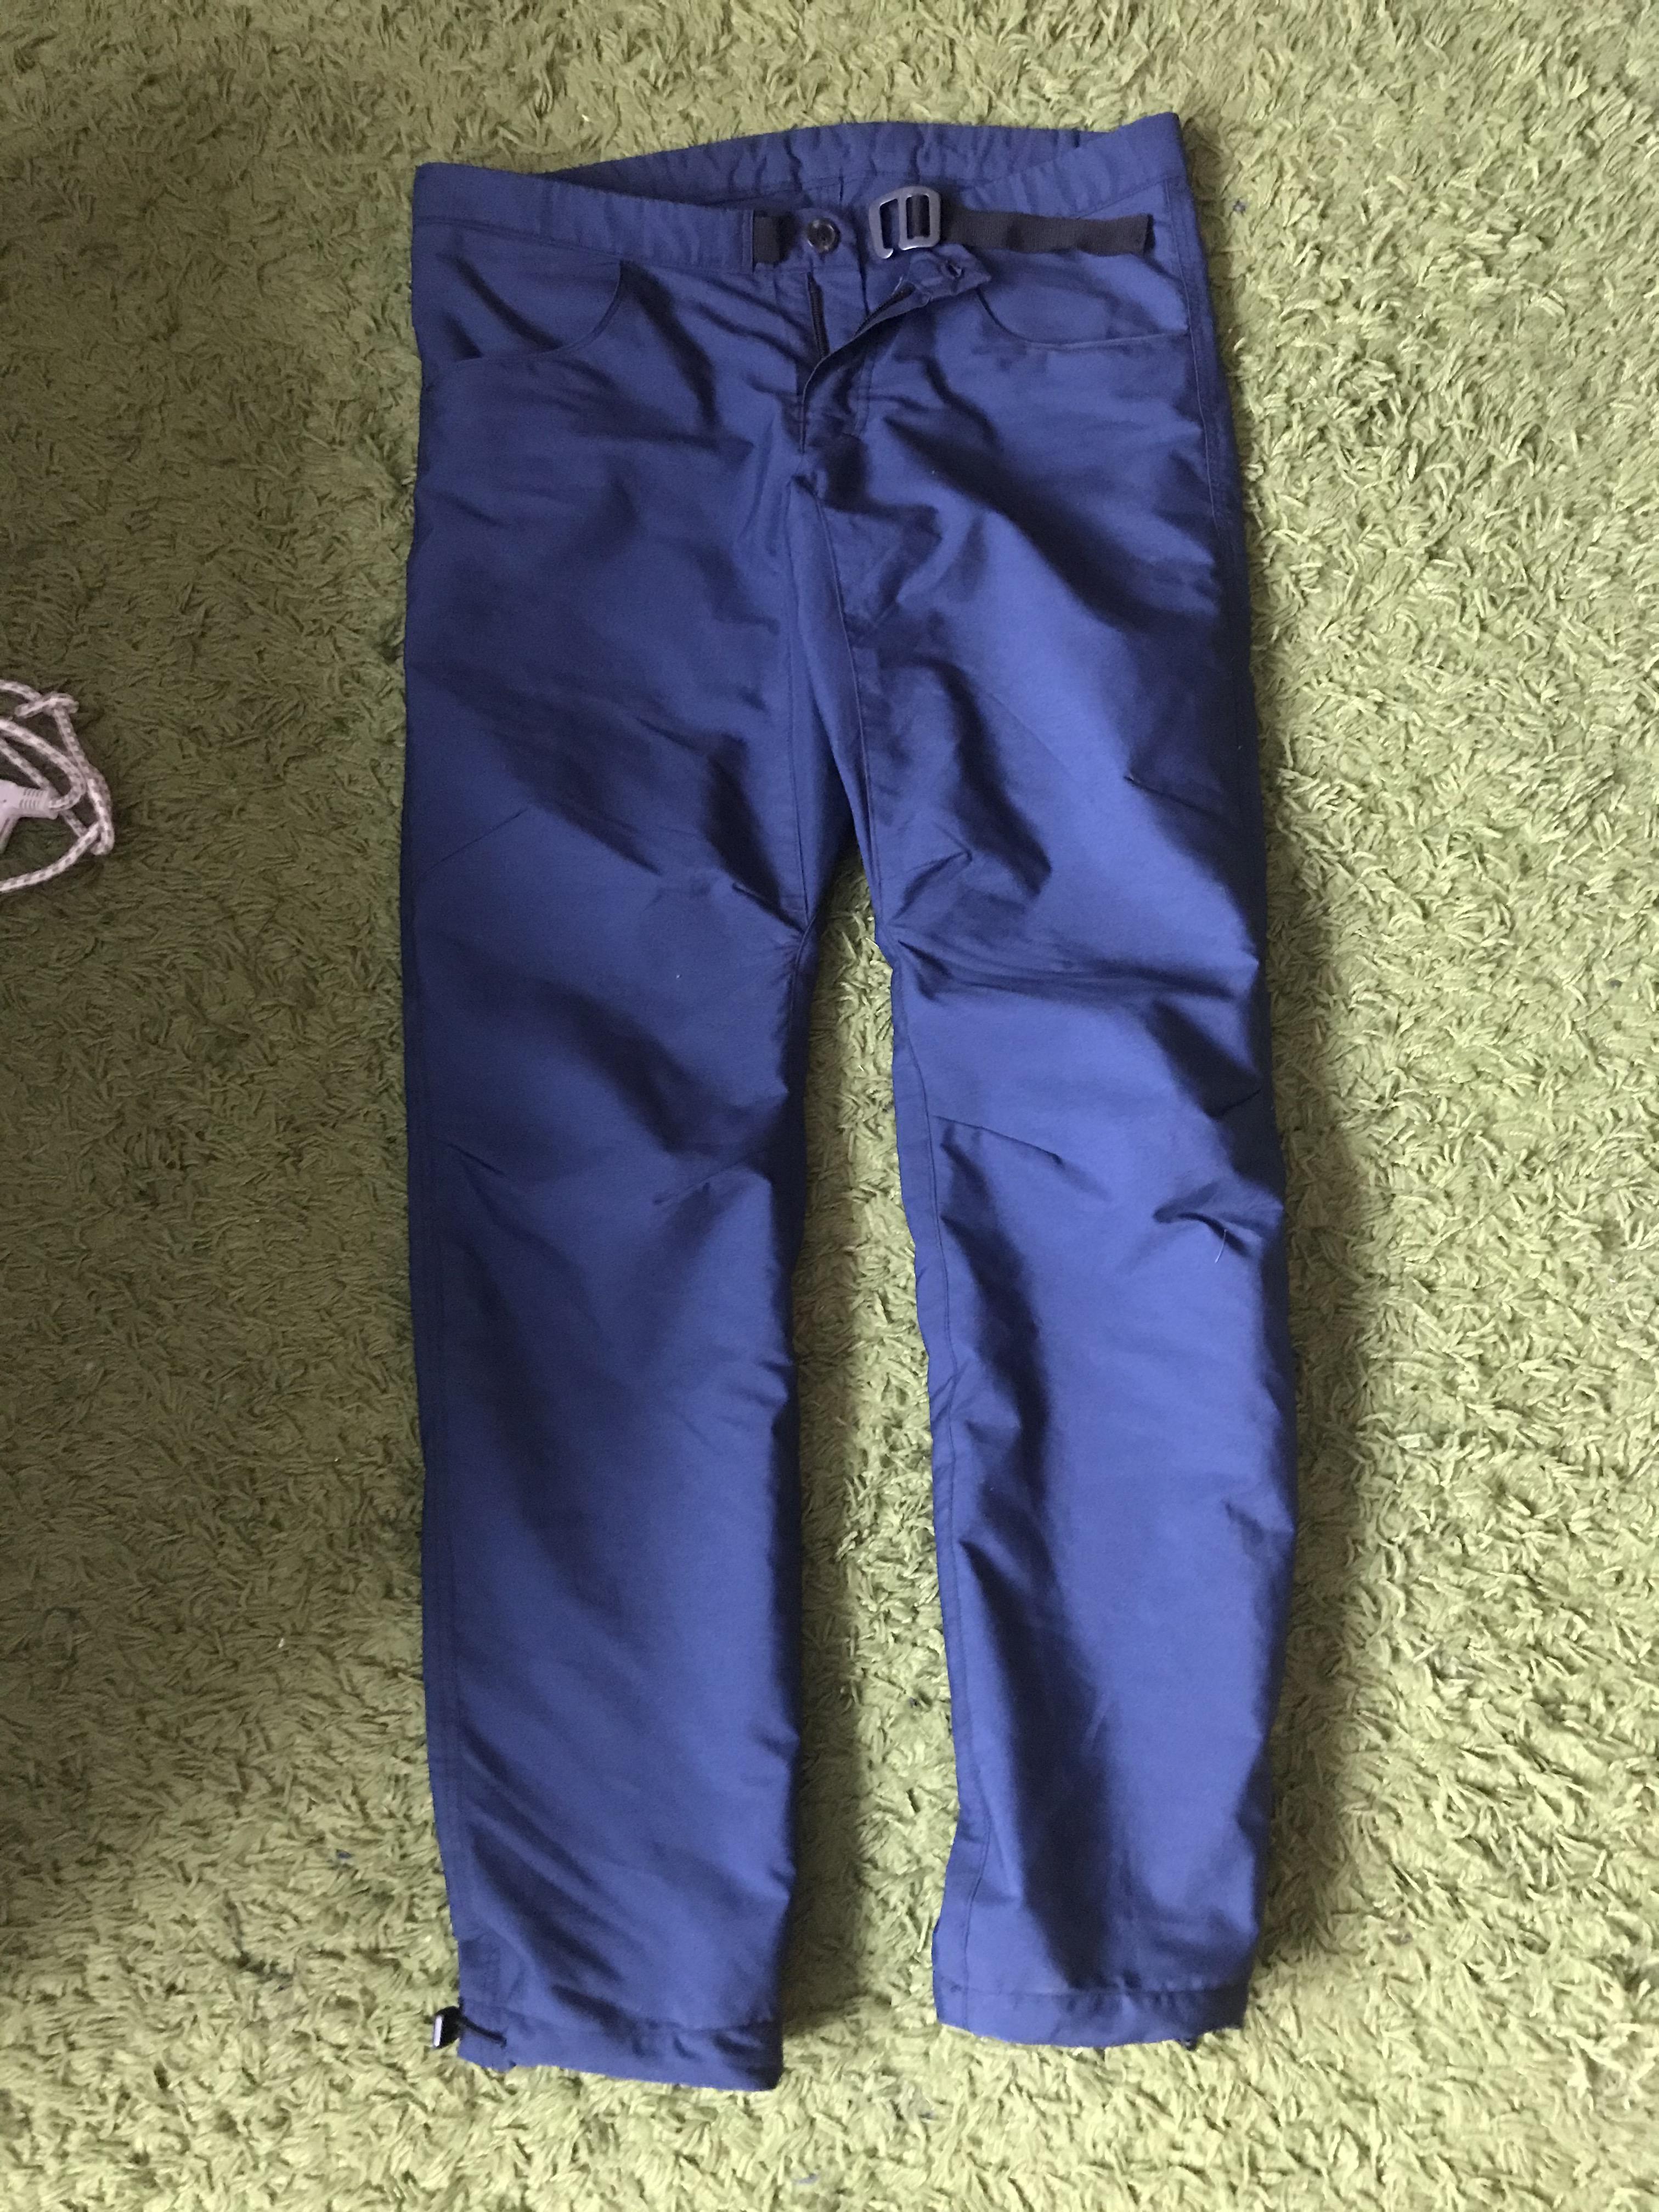 Helpful link for making pants - Backpacking Light